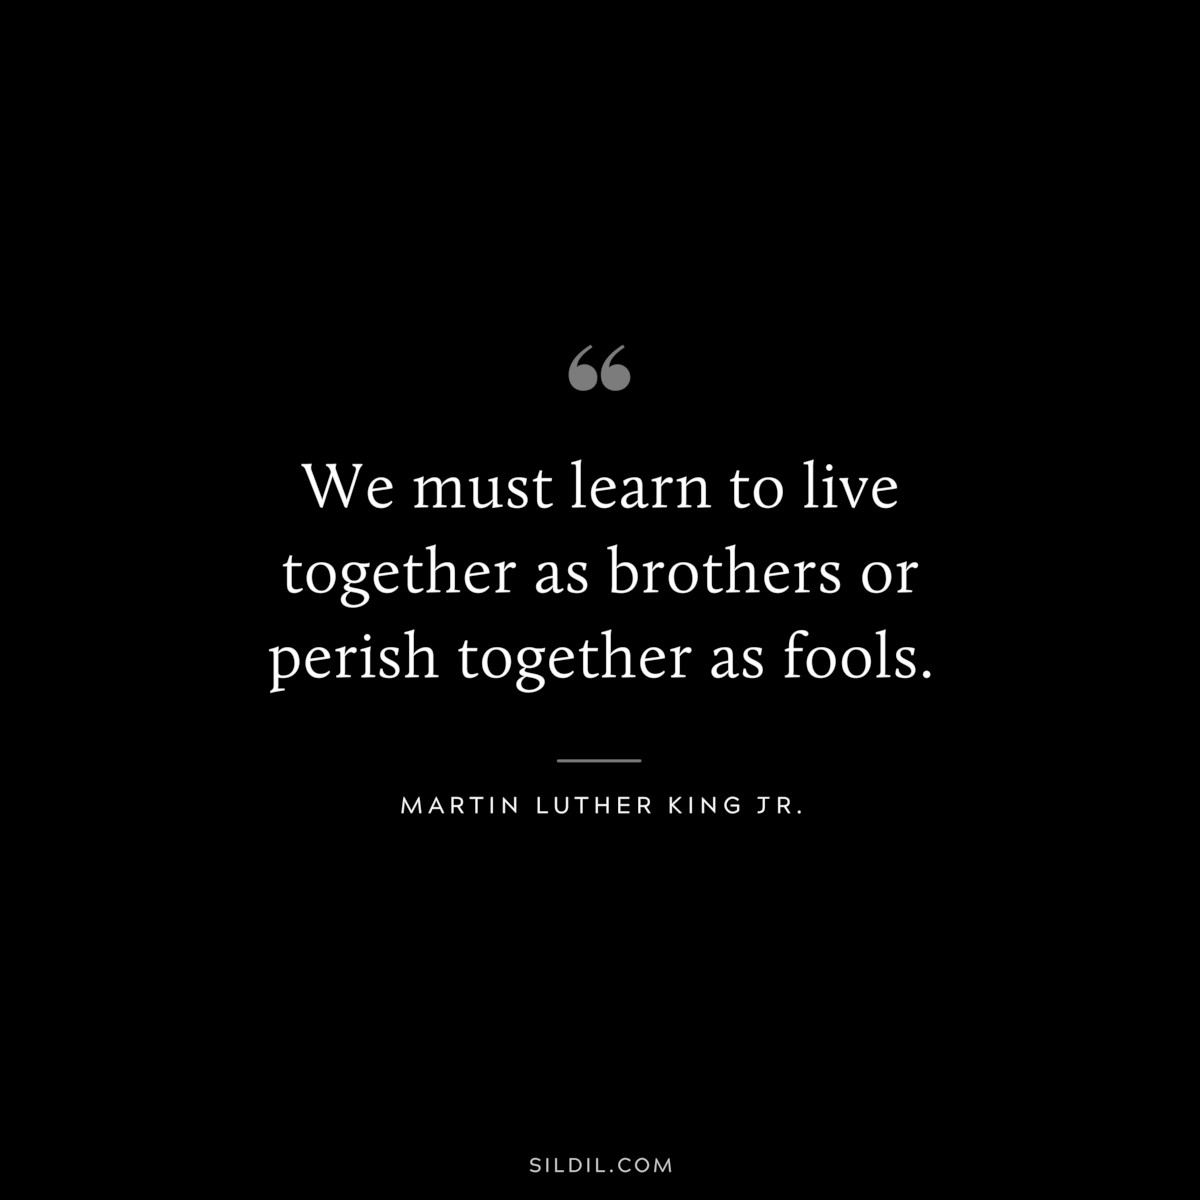 We must learn to live together as brothers or perish together as fools. ― Martin Luther King Jr.